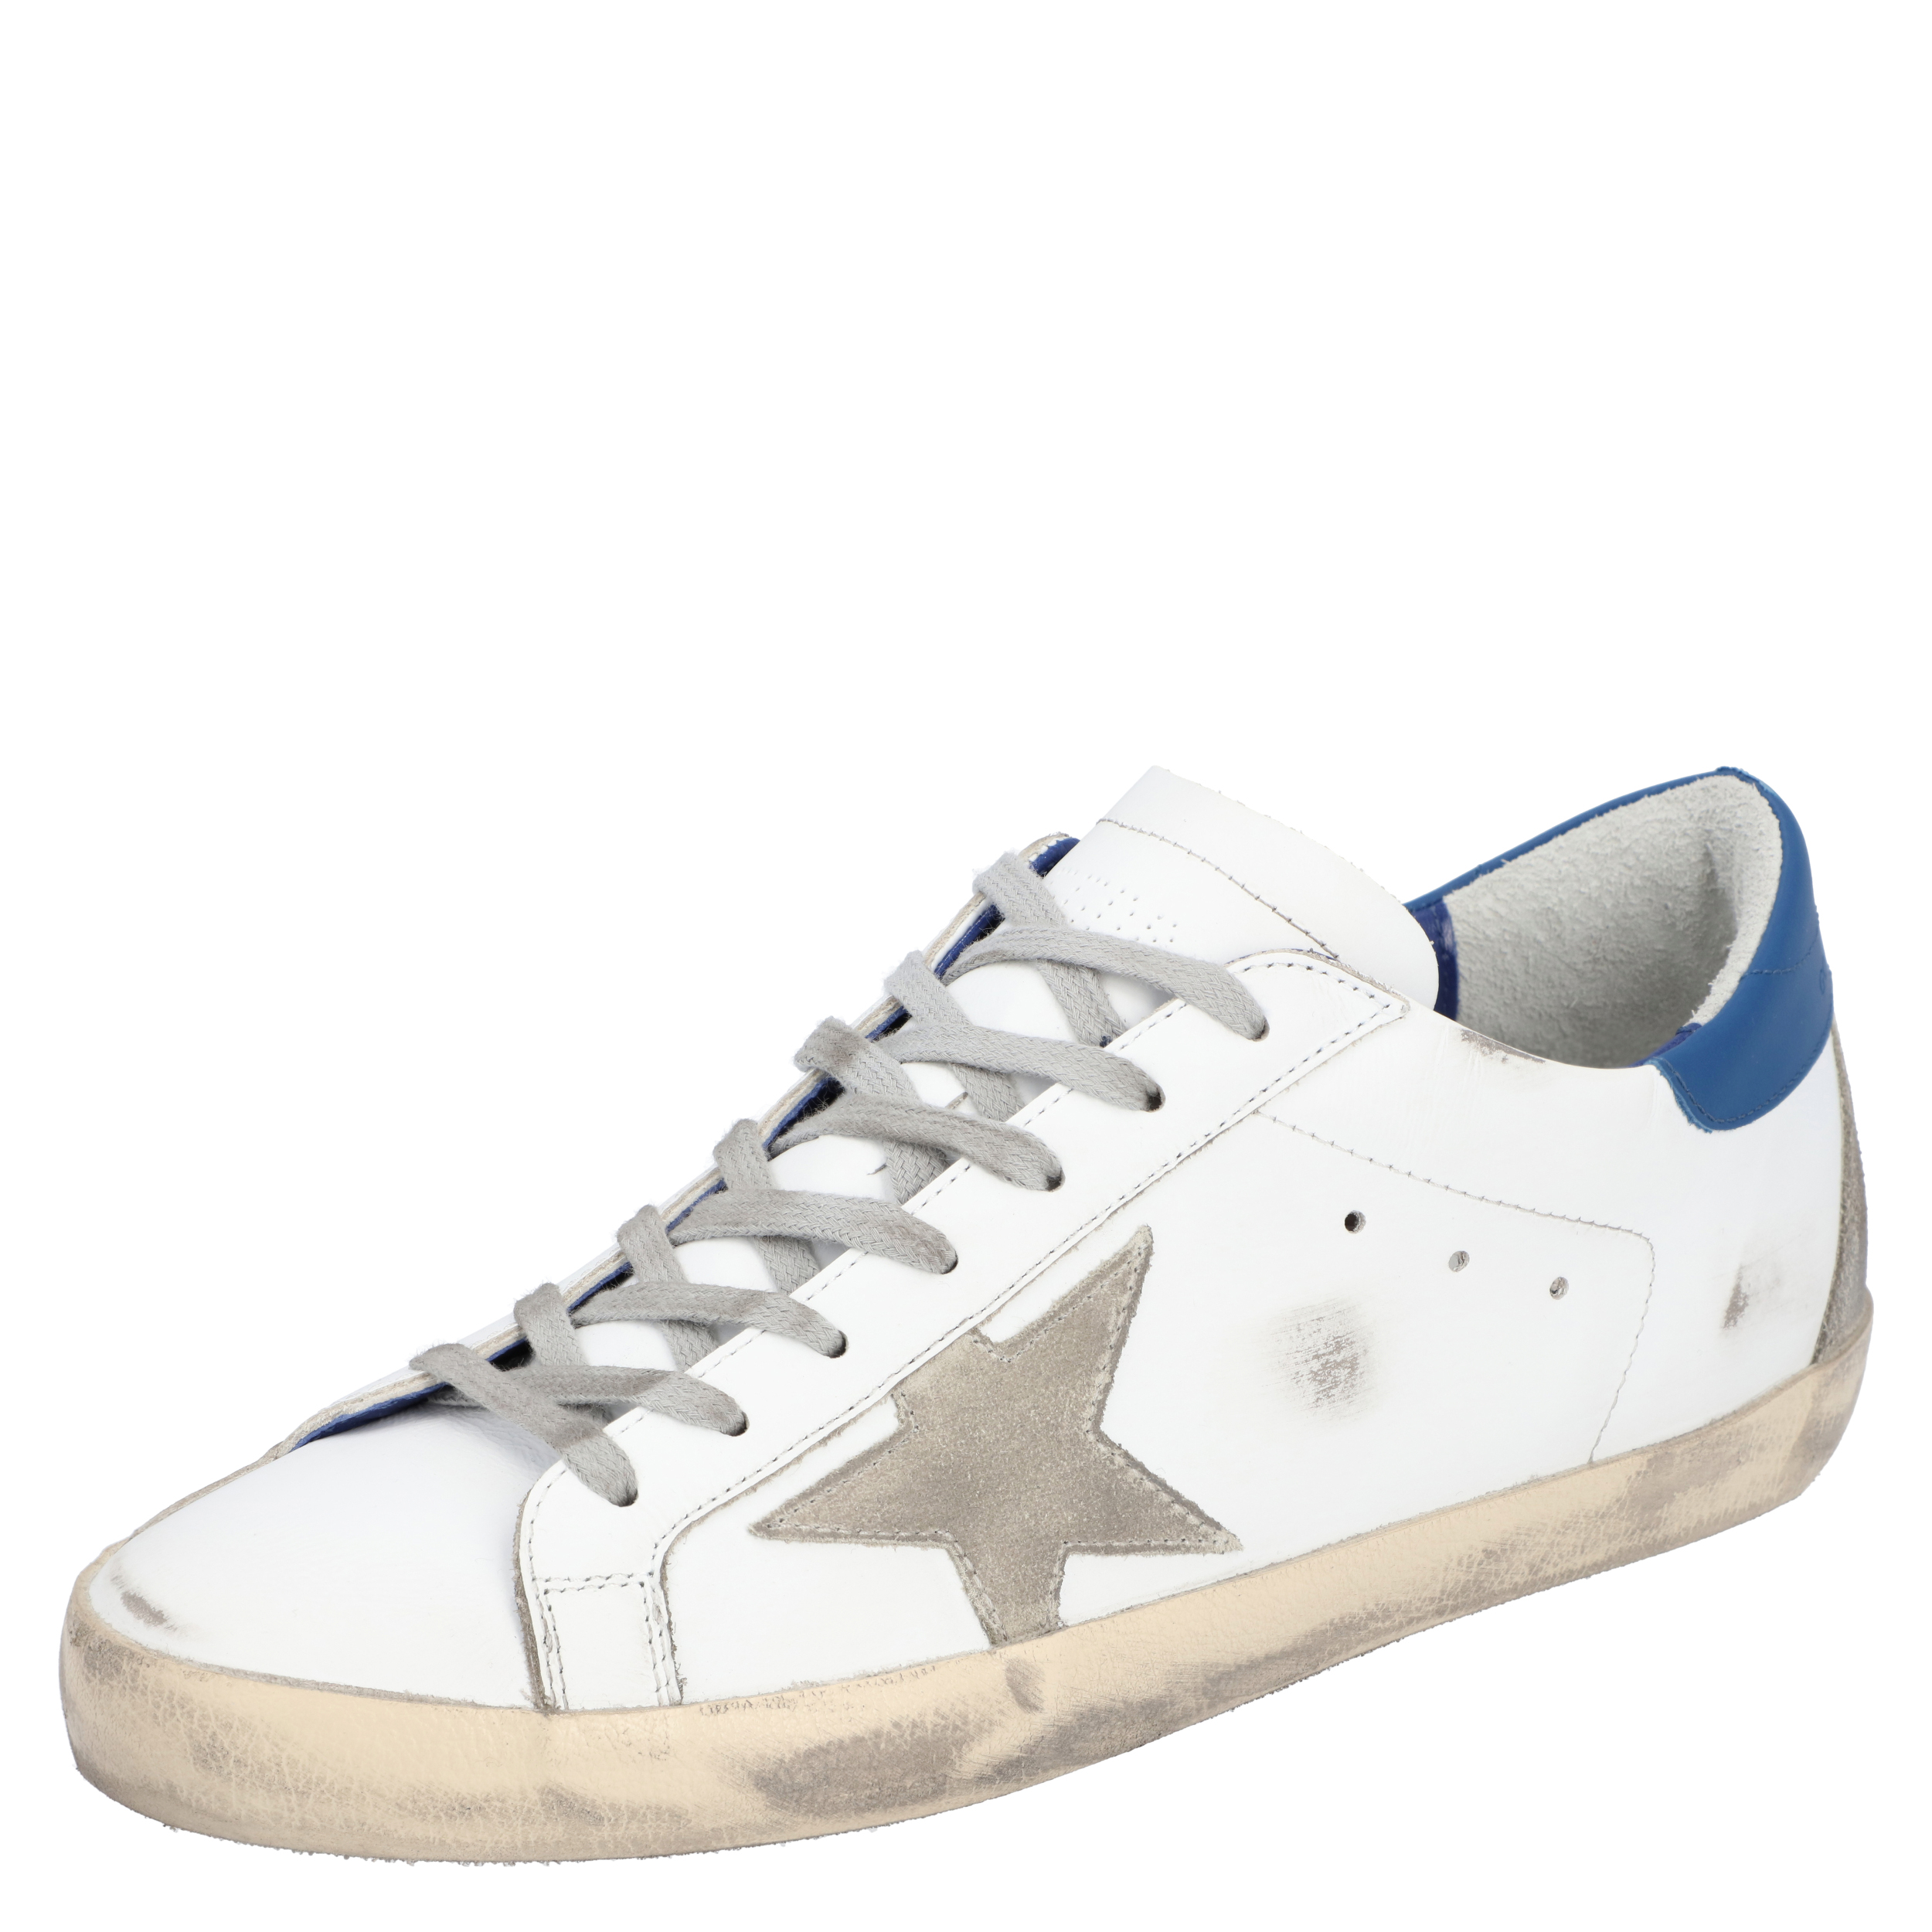 Golden Goose White/Blue Leather Superstar Sneakers Size EU 40